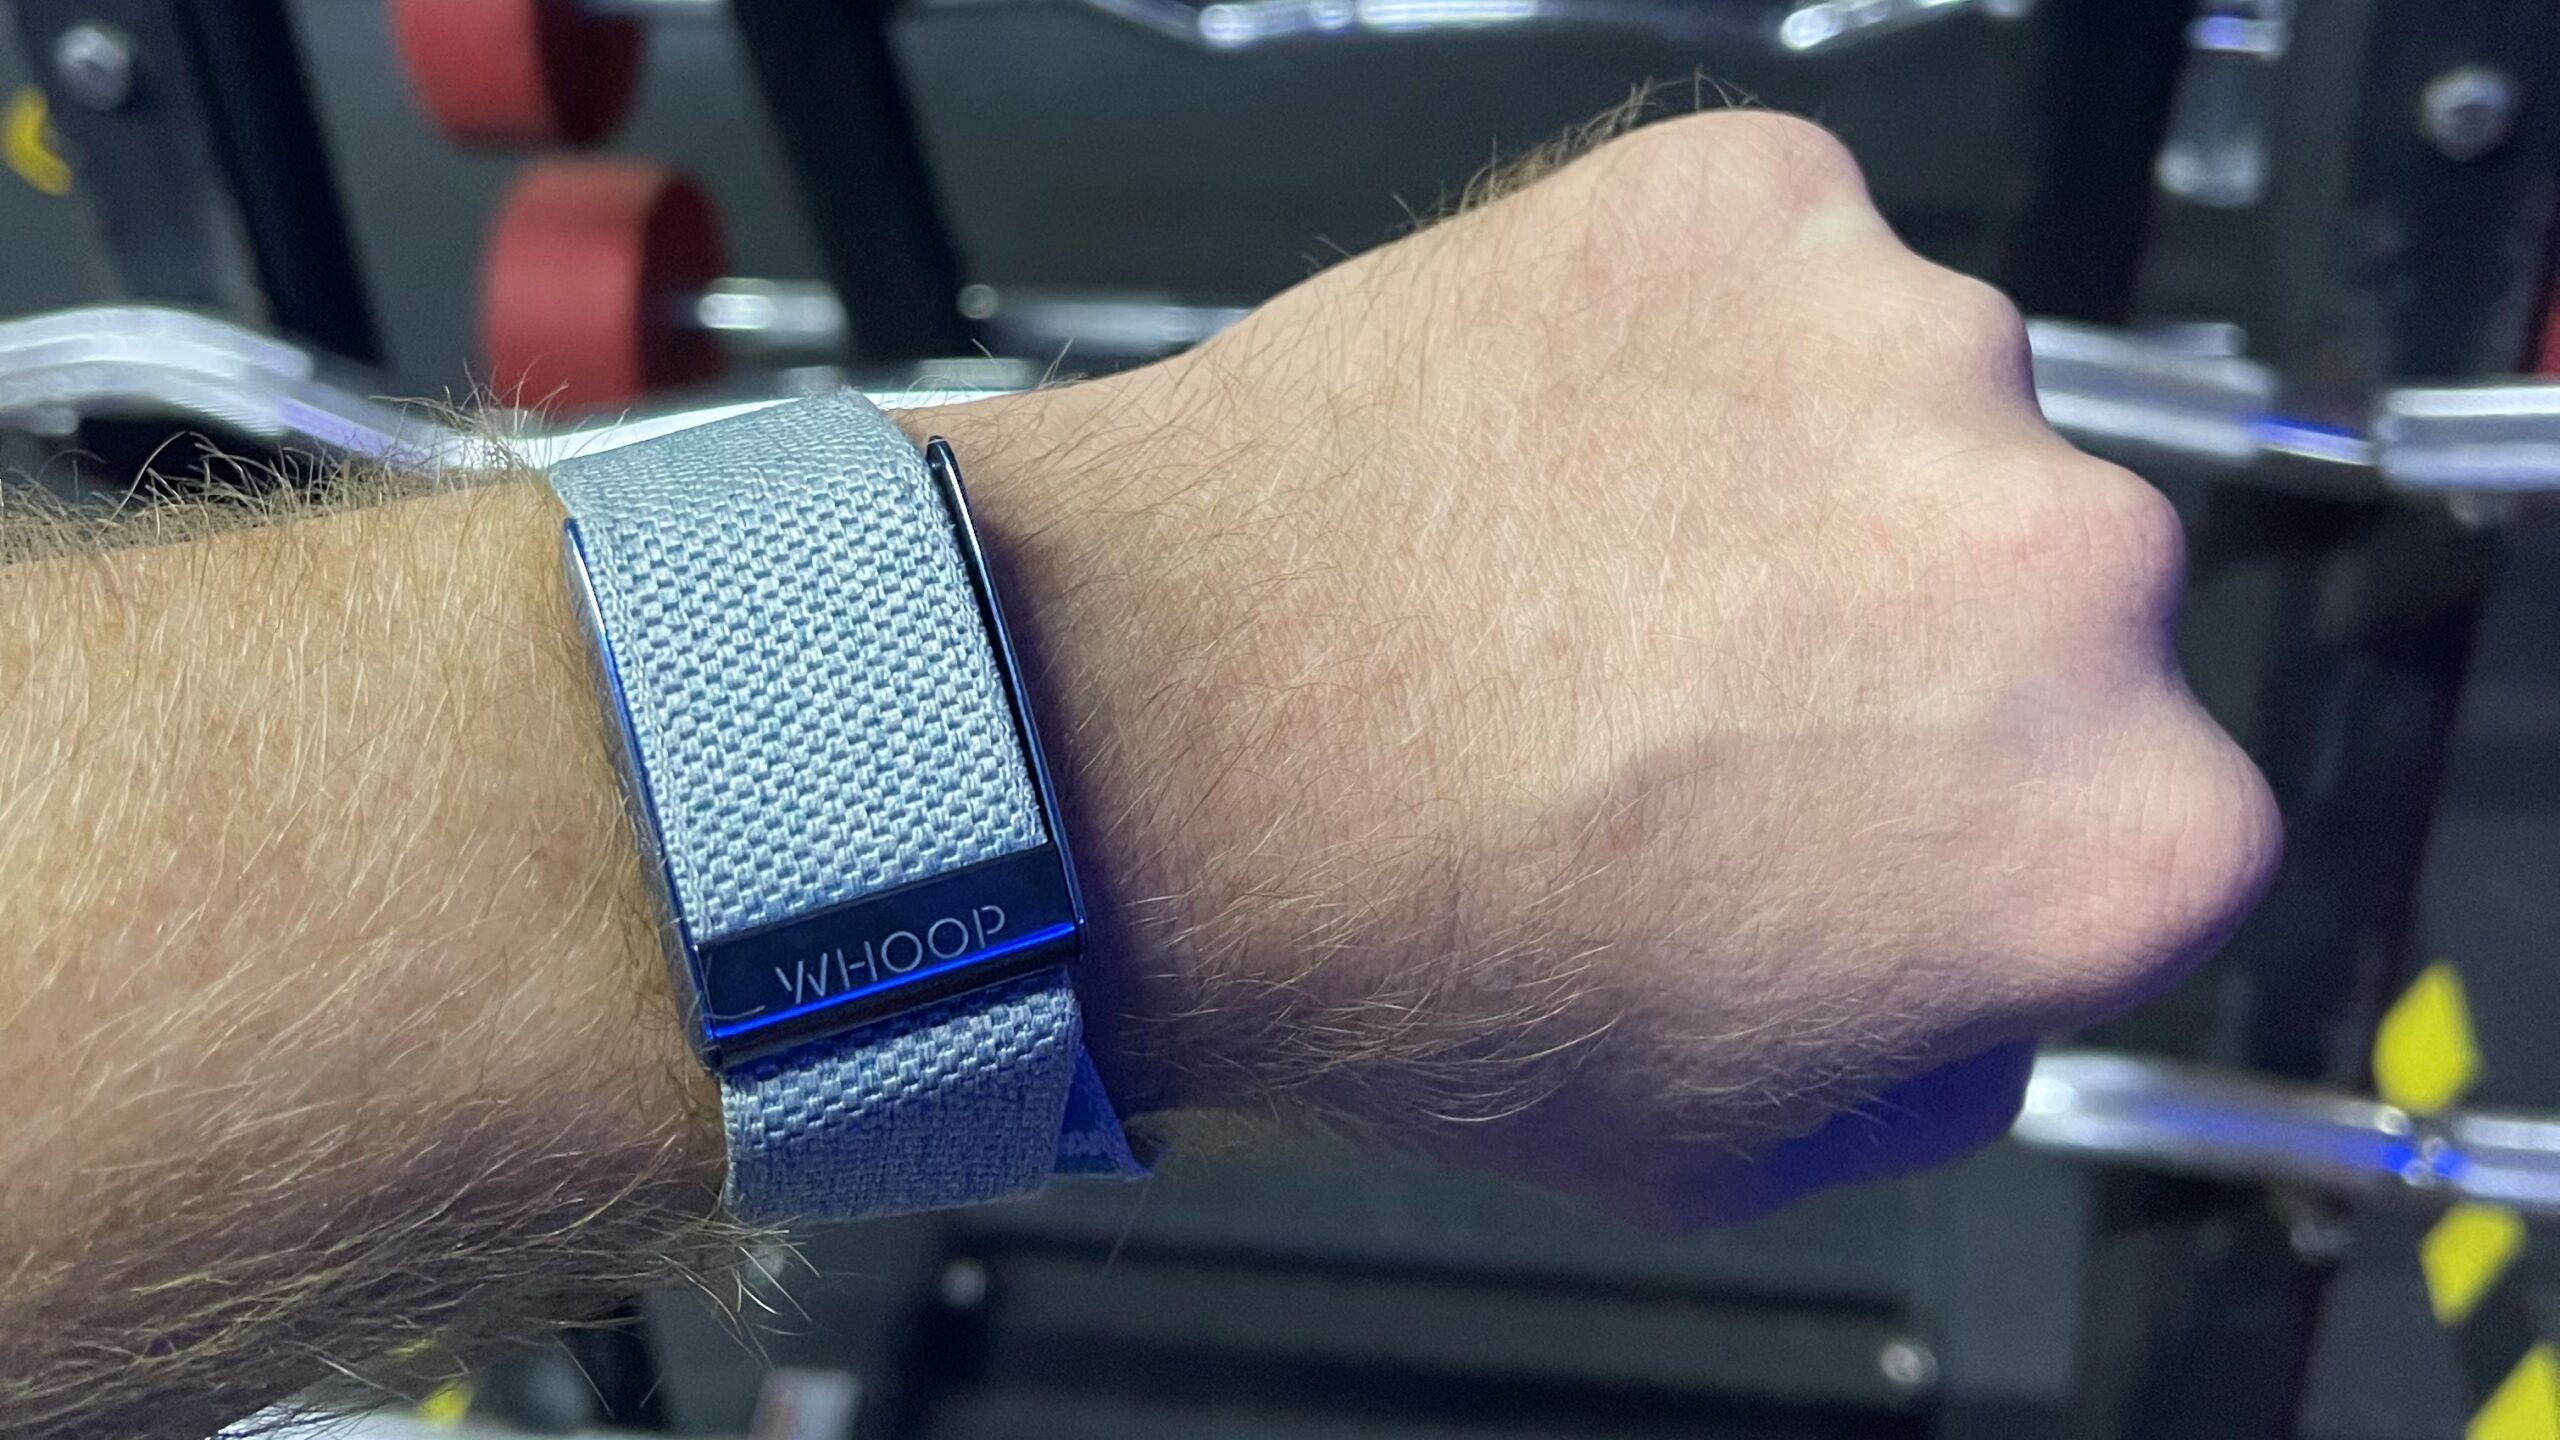 Are fitness trackers accurate? Not quite - Android Authority